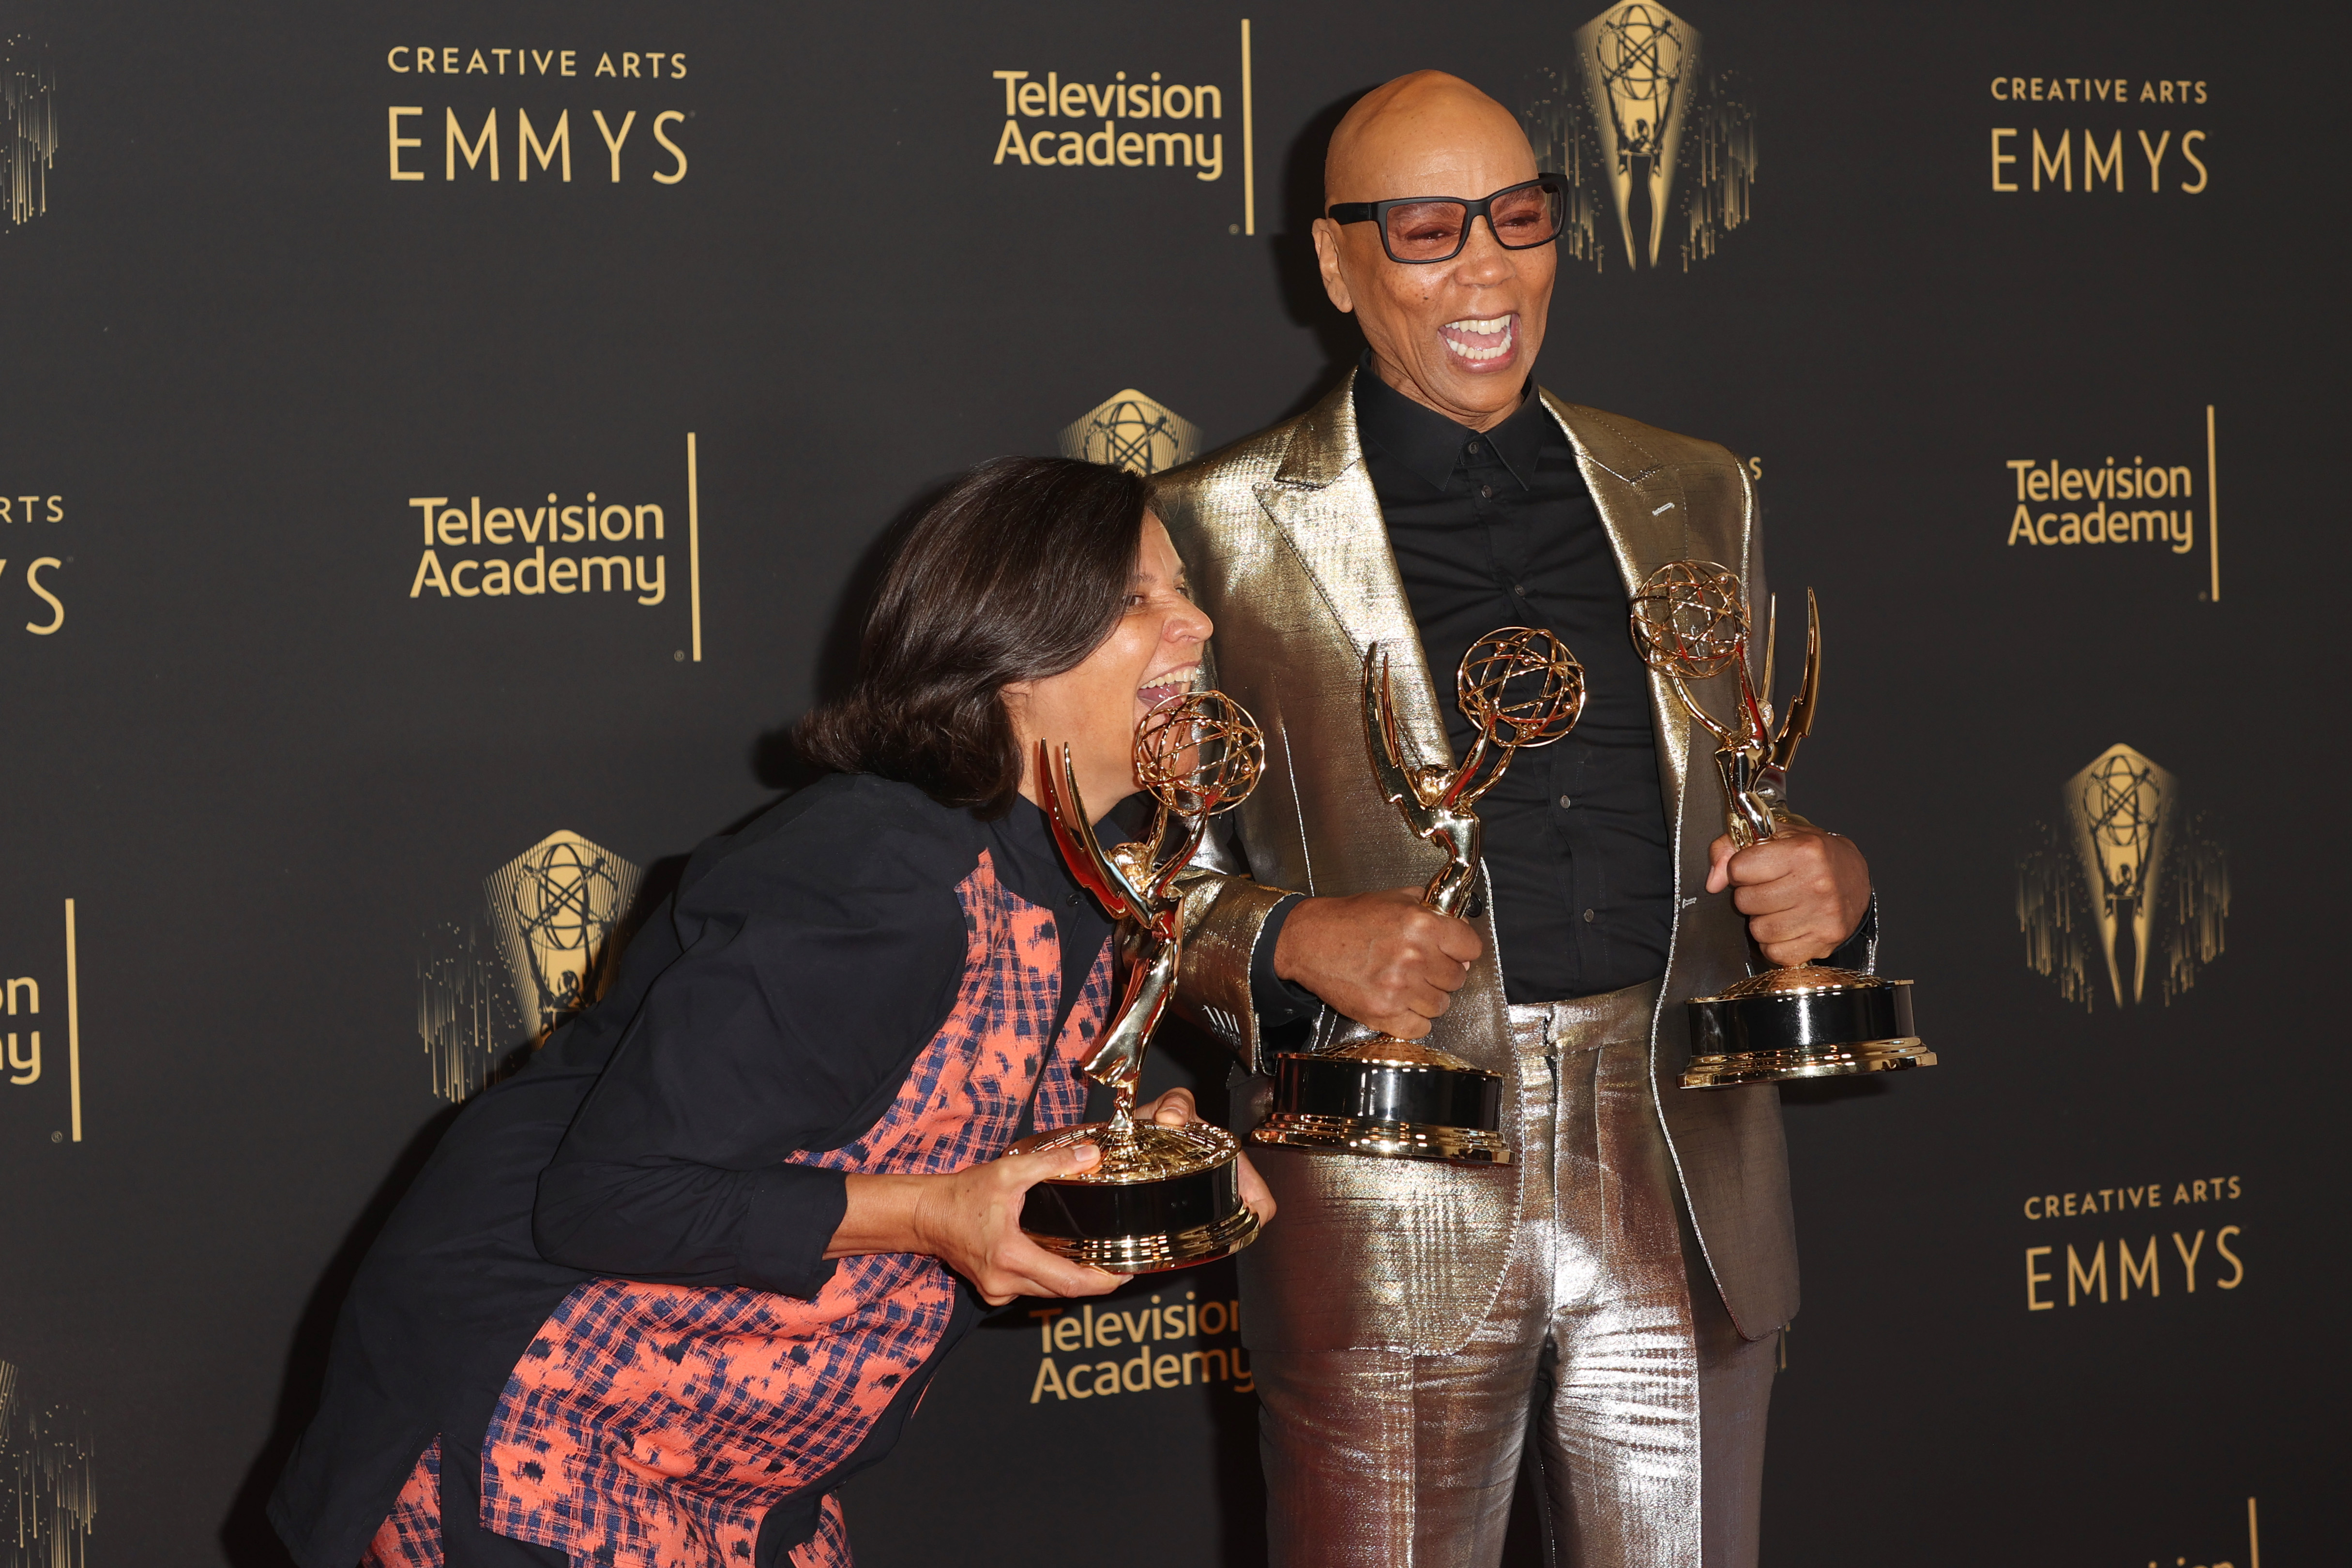 Kristen Johnson and RuPaul pose with the awards at the Creative Arts Emmys